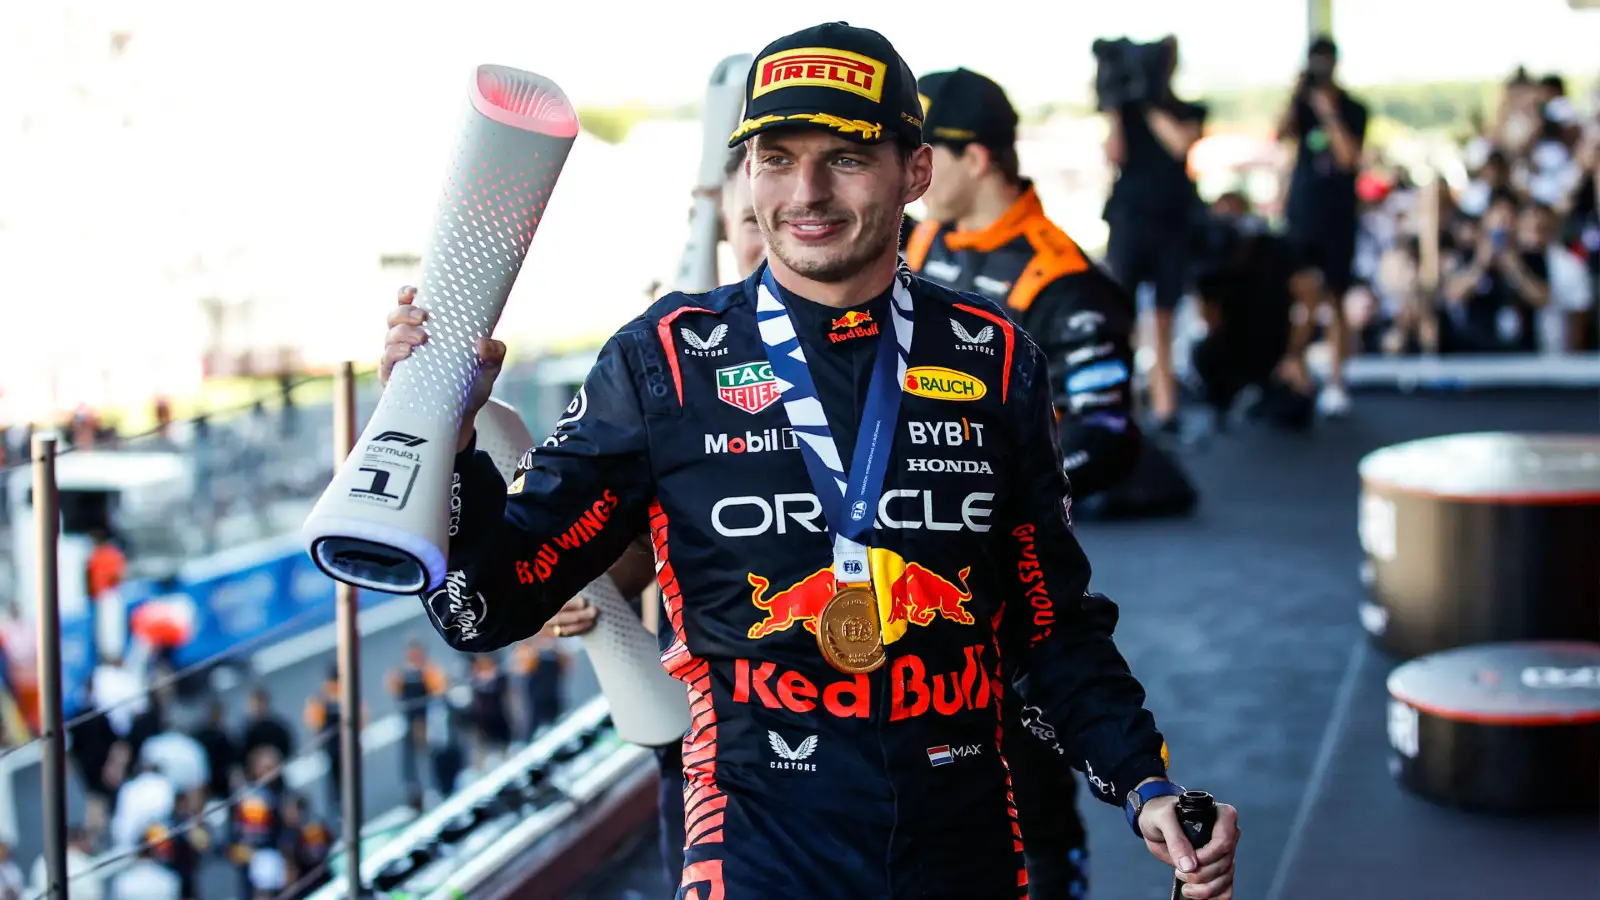 Red Bull's Max Verstappen celebrates on the podium after winning the Japanese Grand Prix.